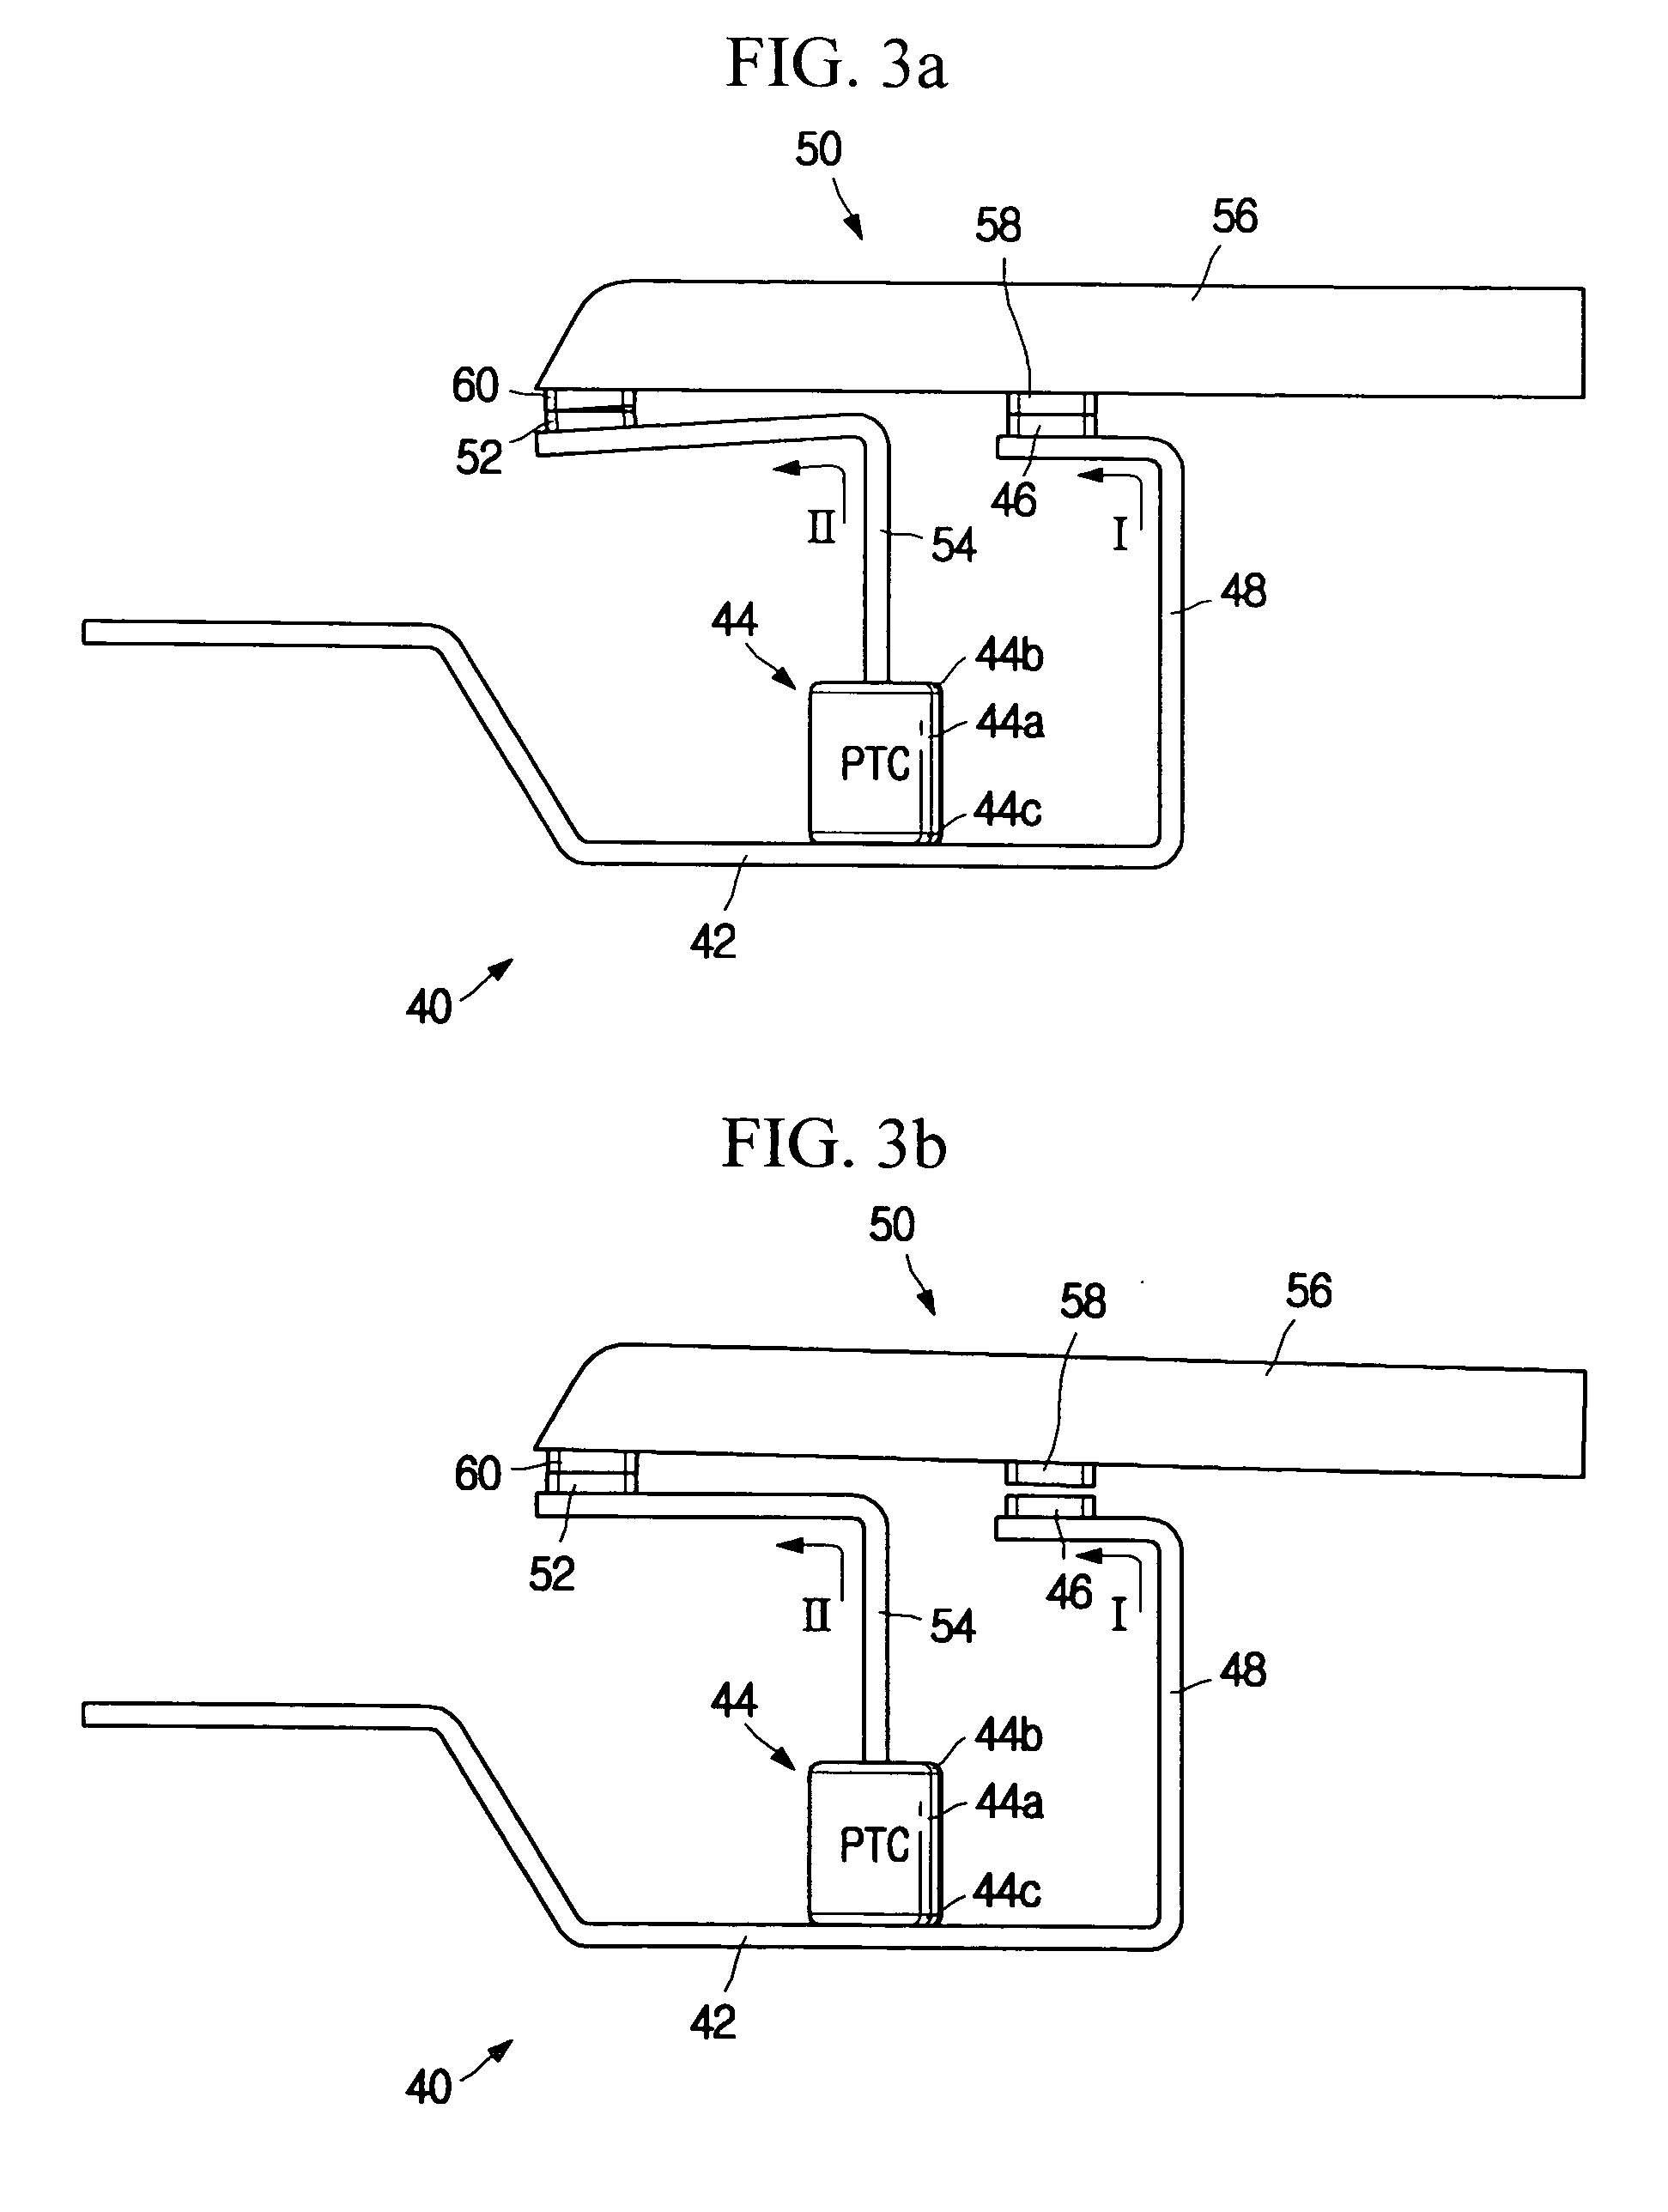 Breaker for providing successive trip mechanism based on PTC current-limiting device